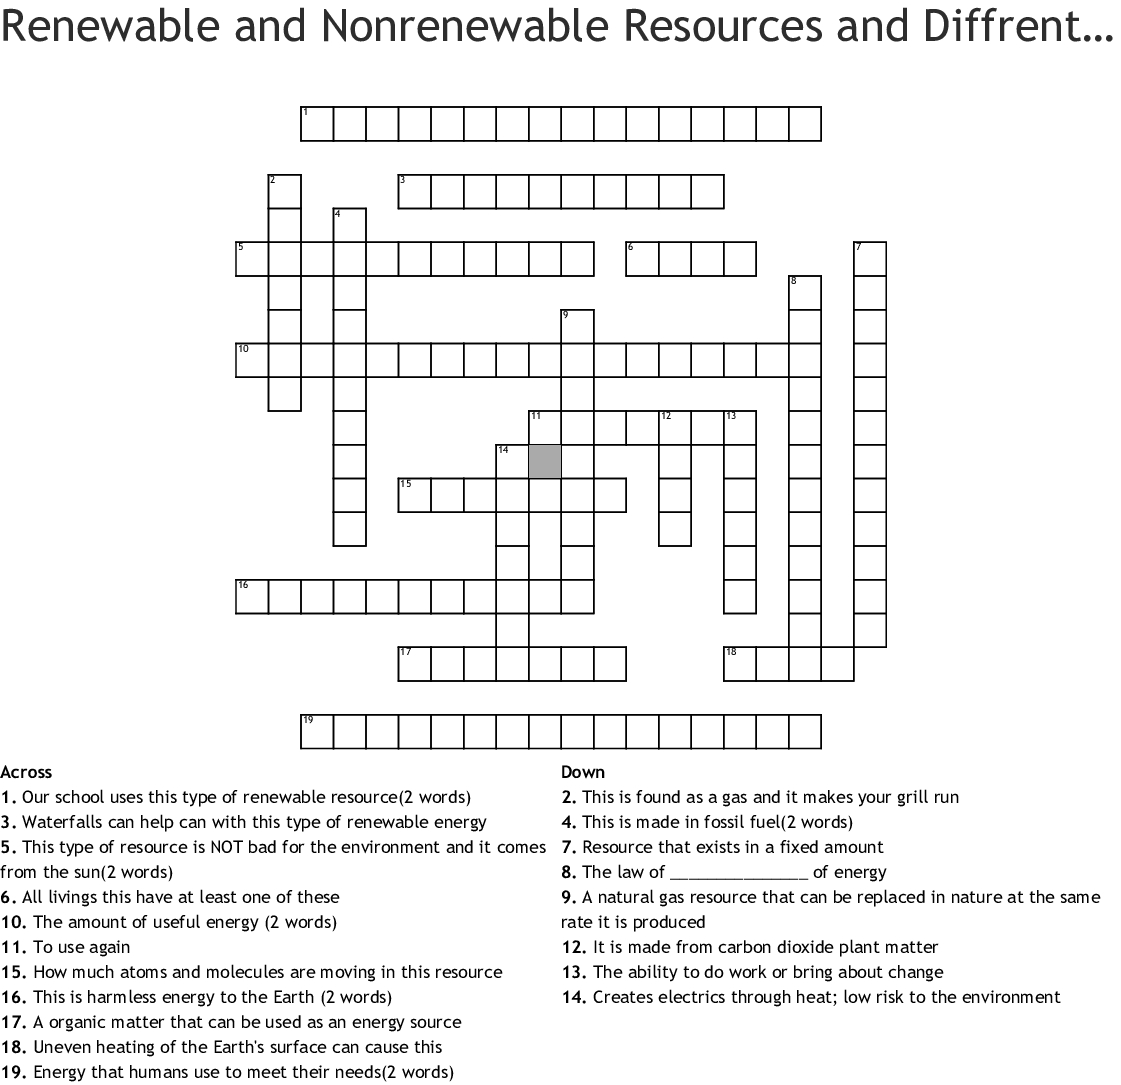 Renewable And Nonrenewable Resources And Diffrent Types Of Energy For Renewable And Nonrenewable Resources Worksheet